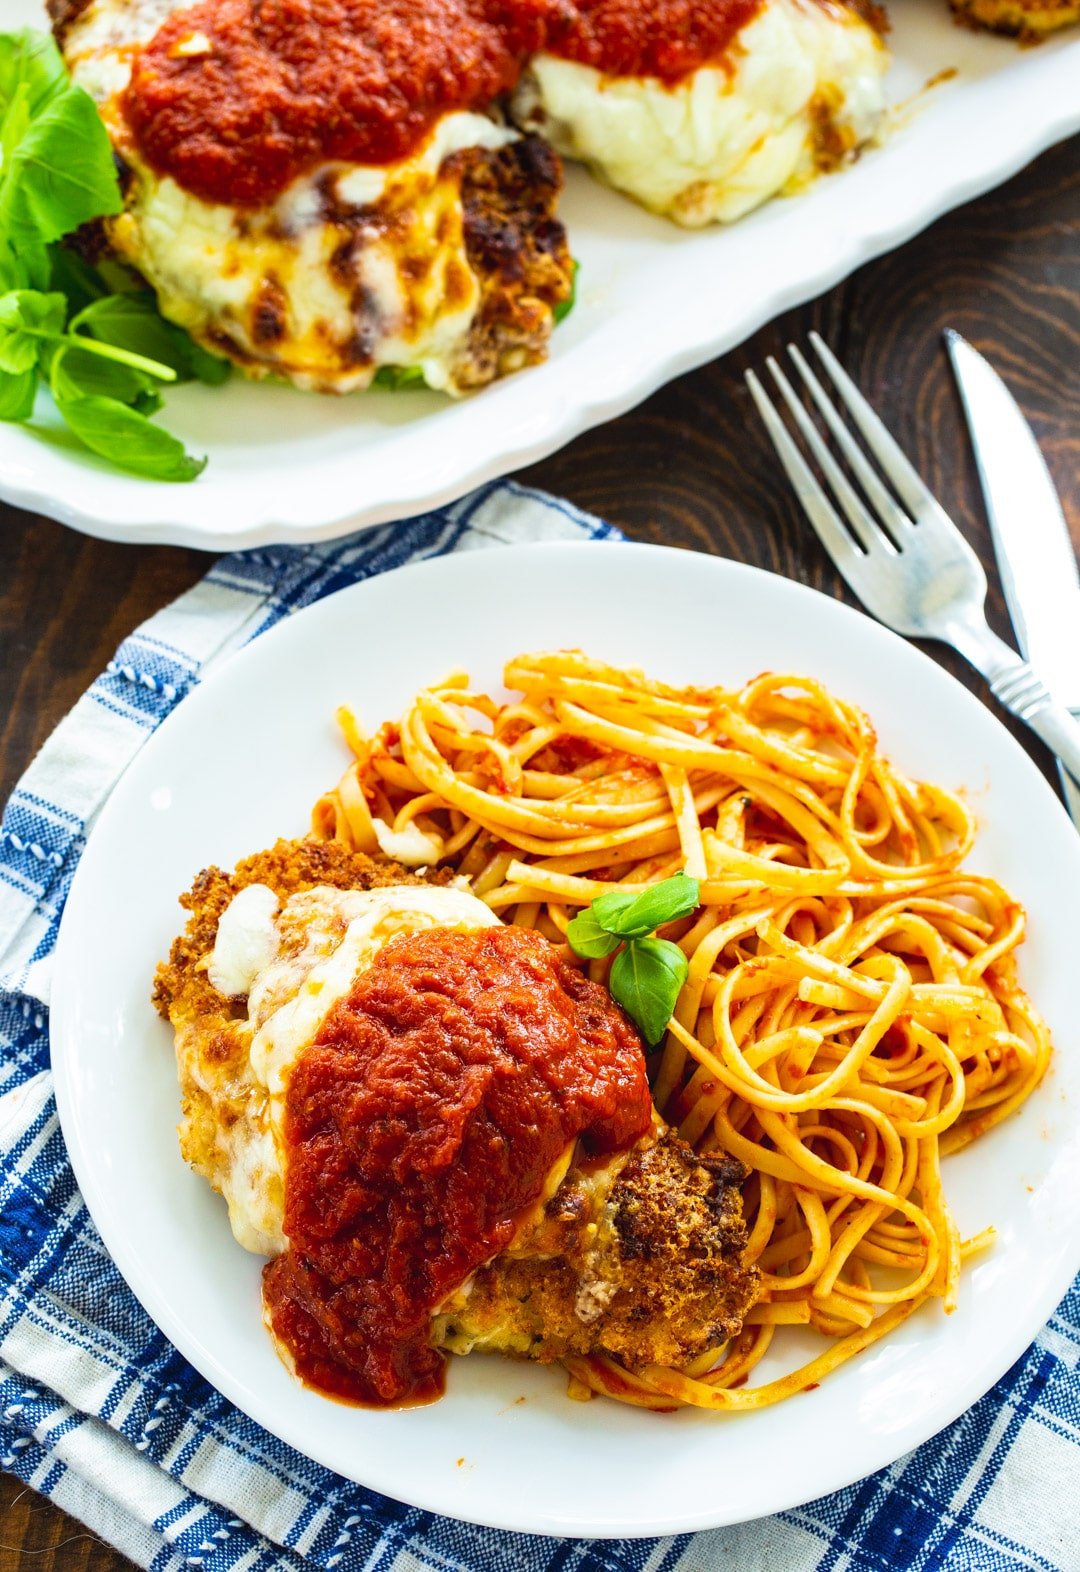 Chicken Parmesan on plate with pasta.